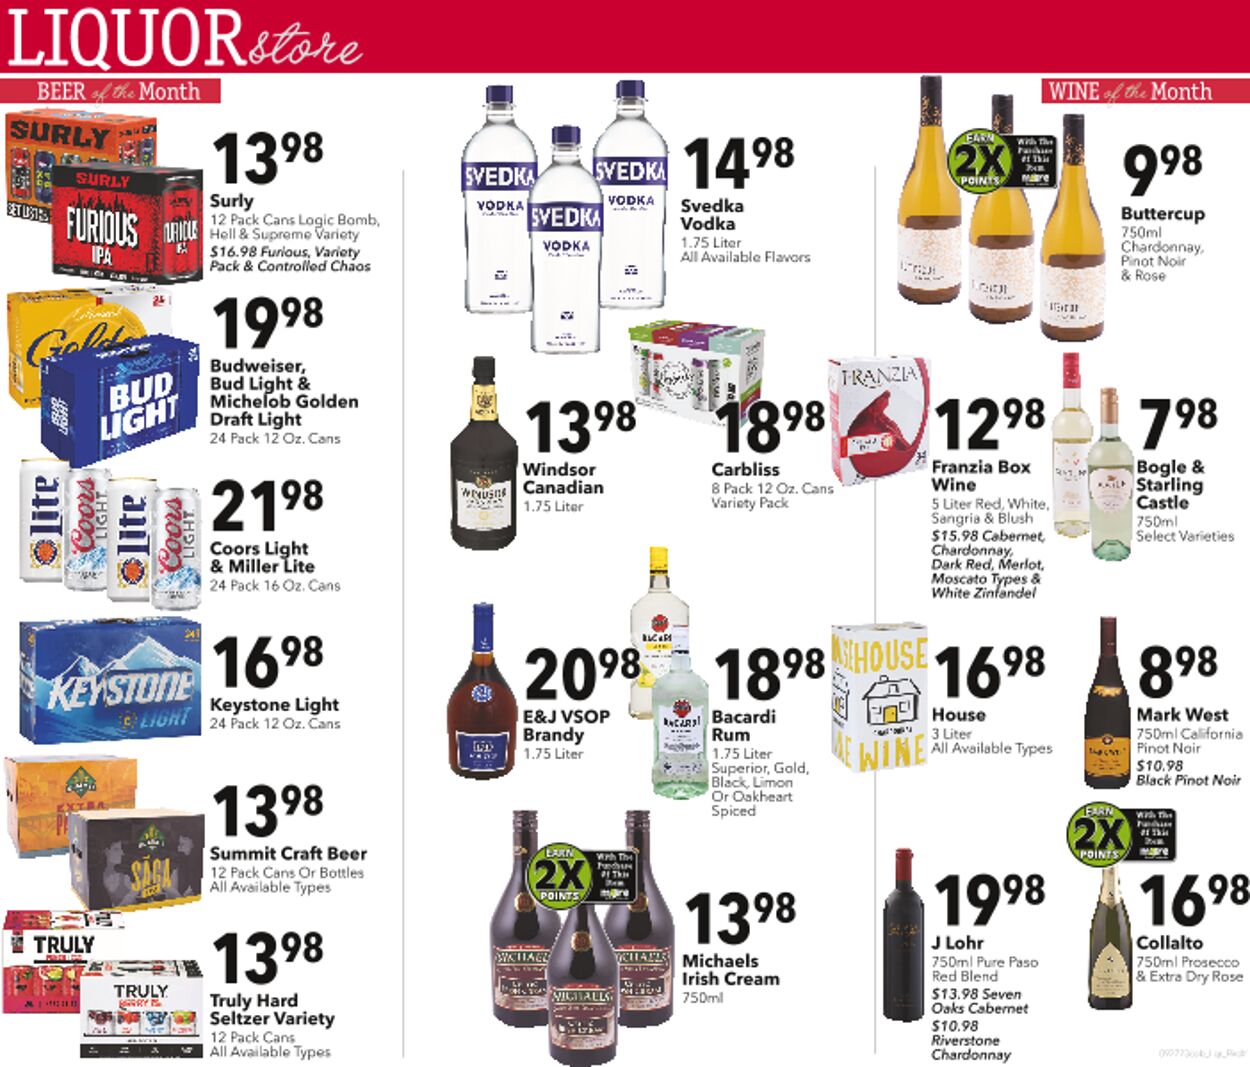 Coborn's Promotional weekly ads